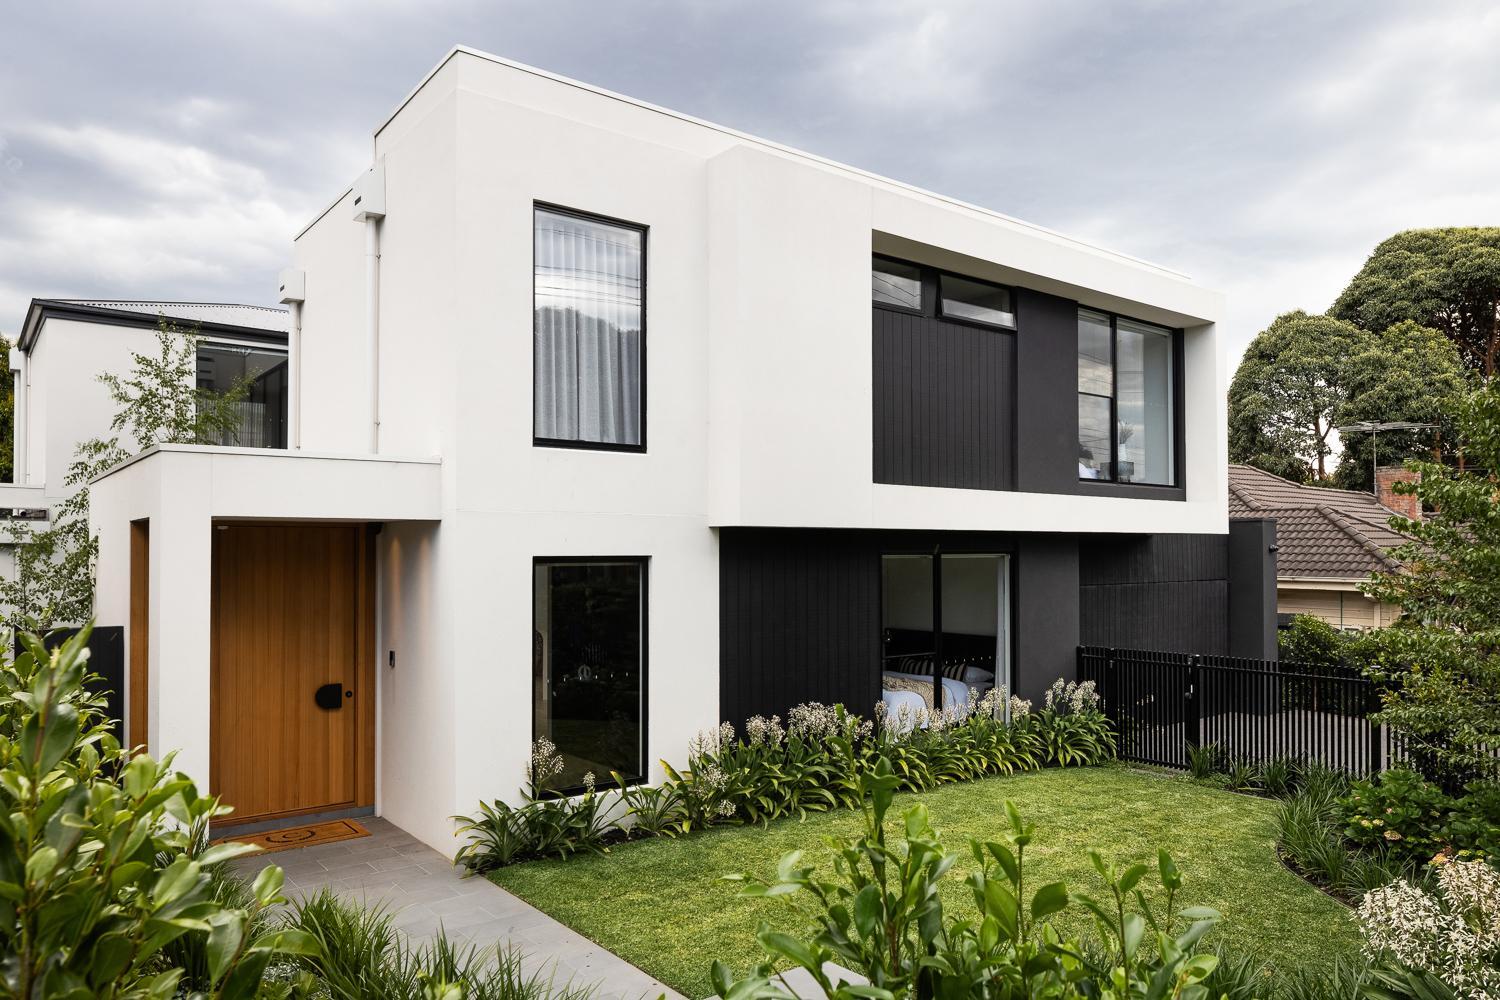 A contemporary house  external facade with a well-maintained garden and lush lawn